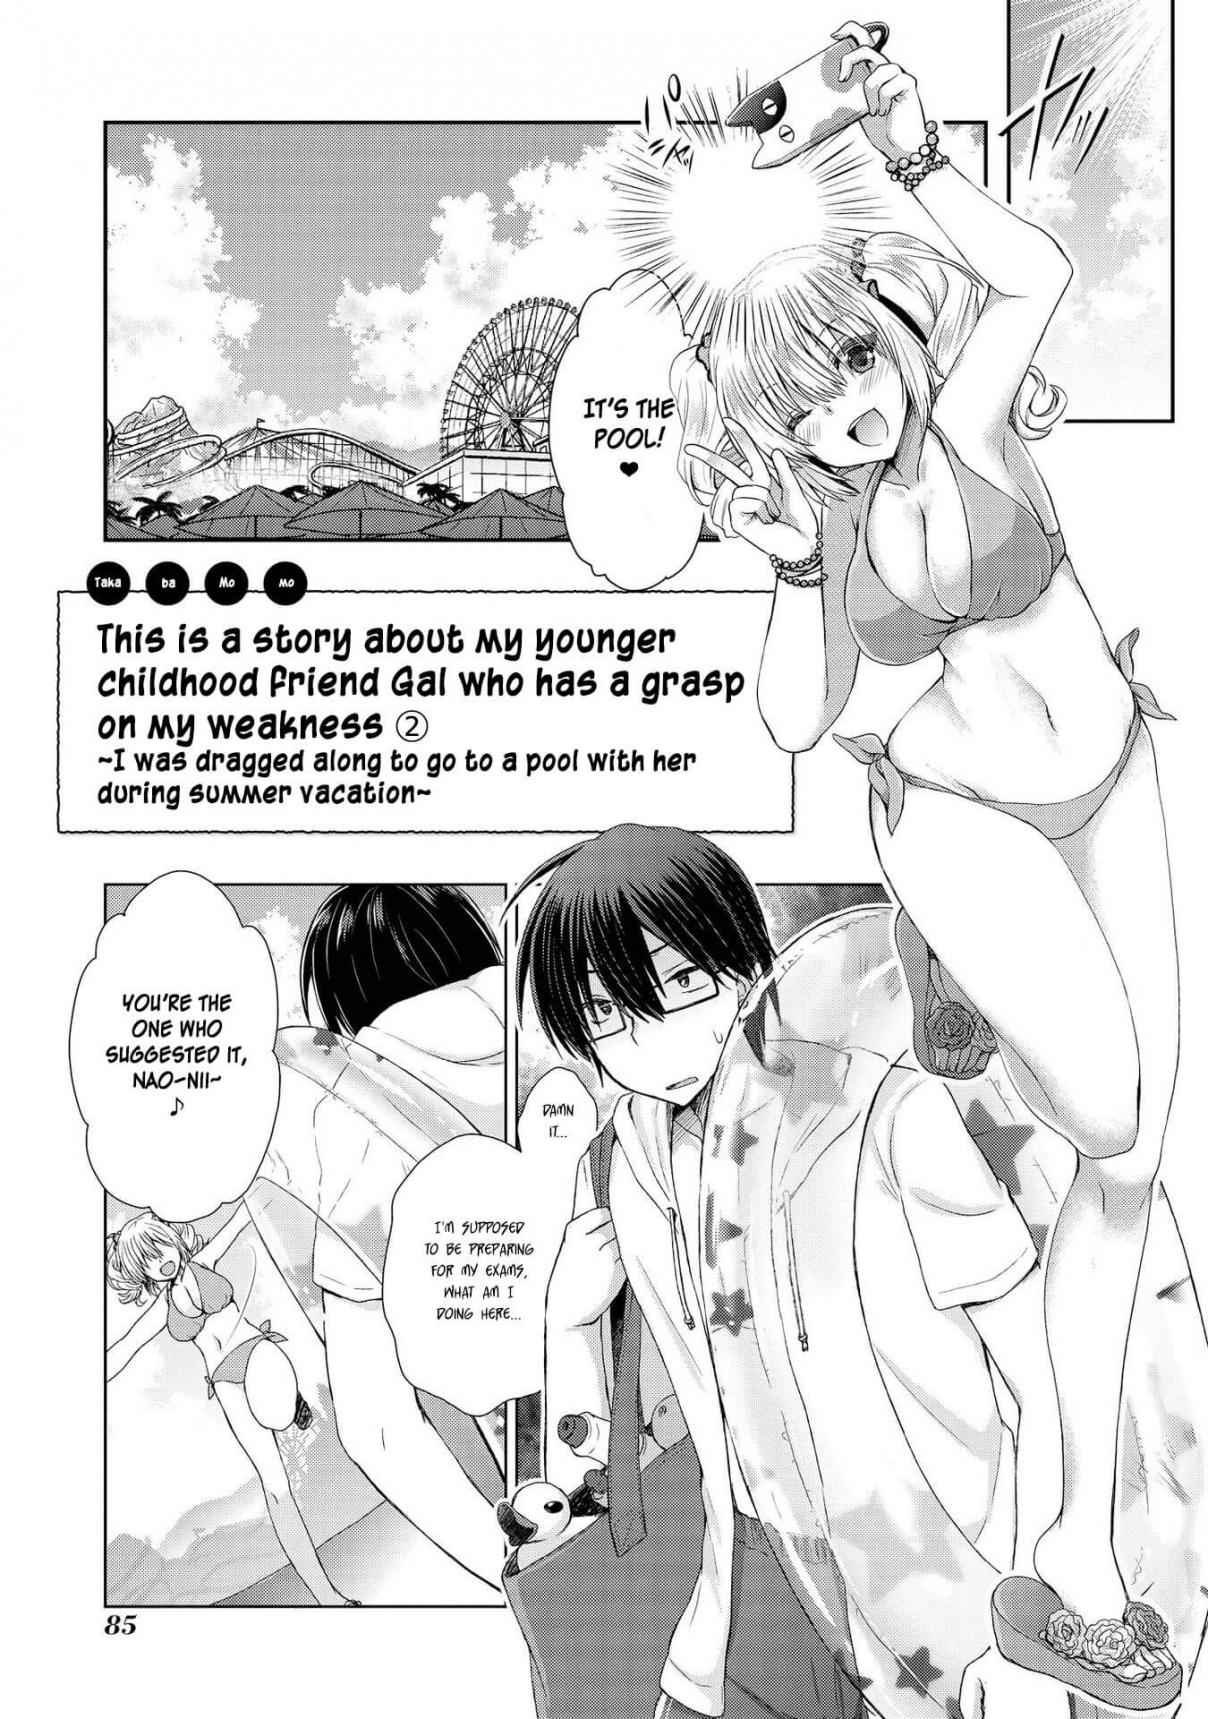 Hyottoshite Gyaru wa Orera ni Yasashii no Dewa? Anthology Comic Vol. 3 Ch. 20 This is a story about my younger childhood friend Gal who has a grasp on my weakness ➁ ~I was dragged along to go to a poo